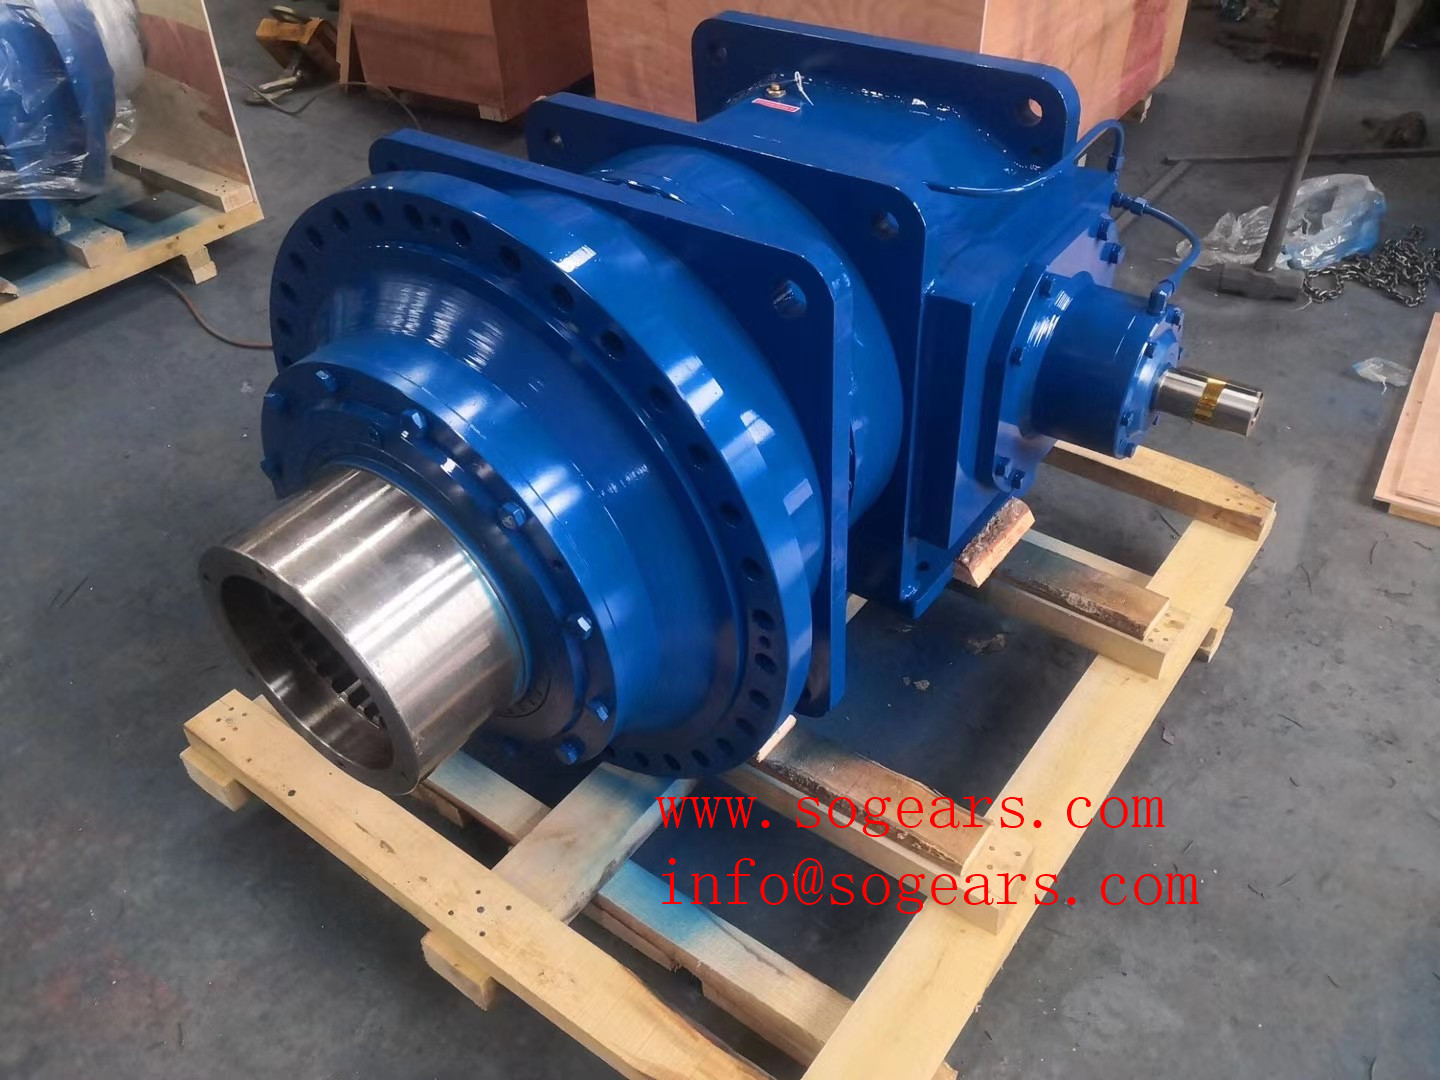 The specifications of synchronous motor